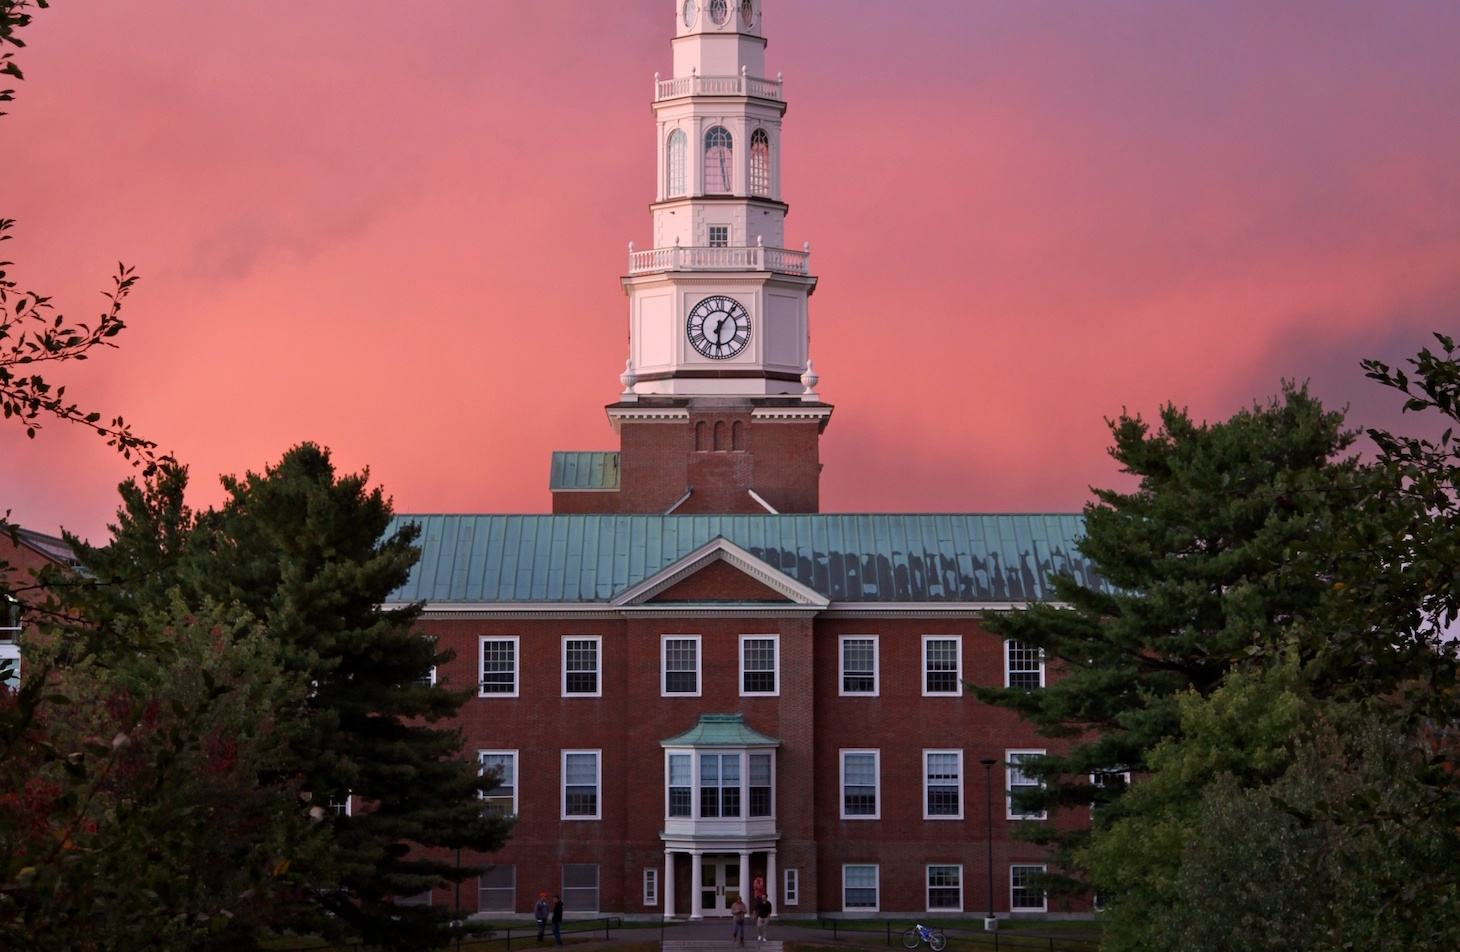 Image of Colby College